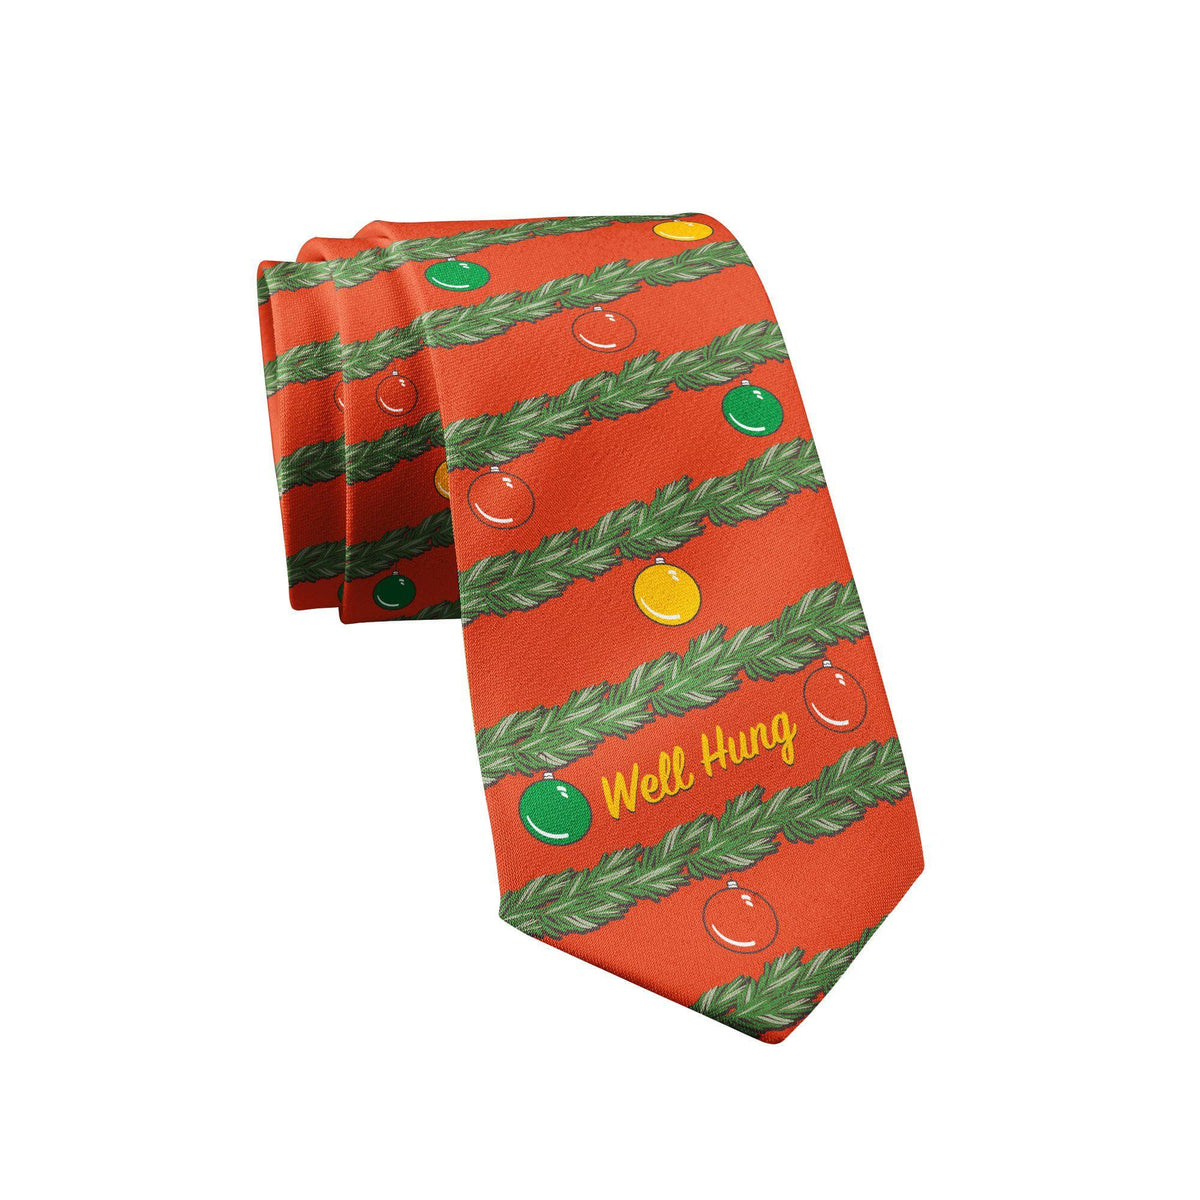 Well Hung Neck Tie - Crazy Dog T-Shirts